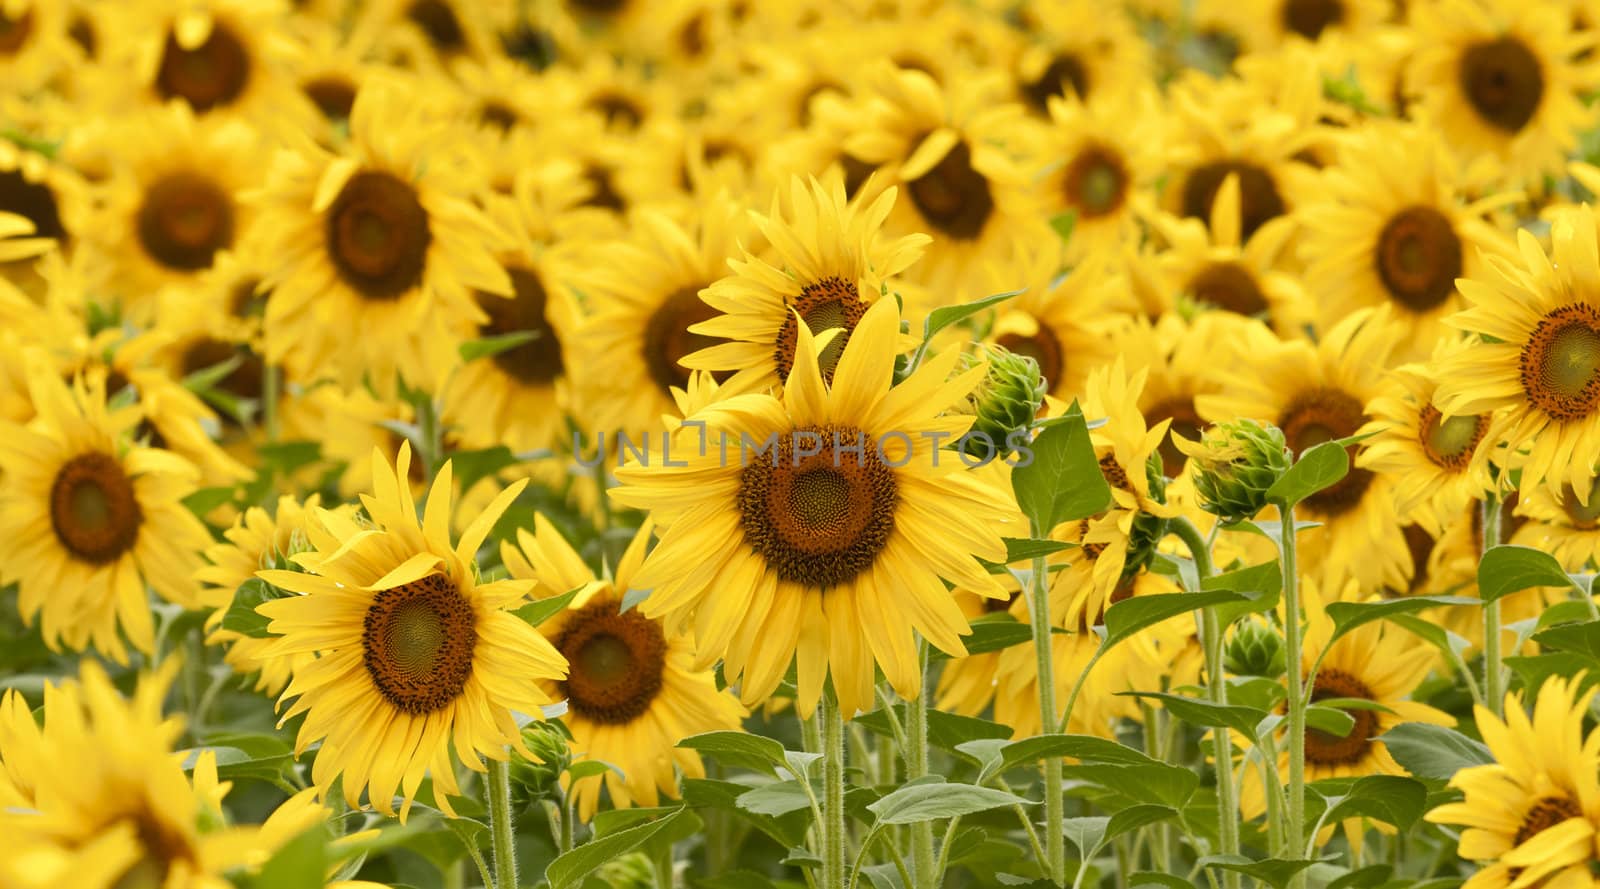 Sunflowers in full bloom in summer by AlessandroZocc